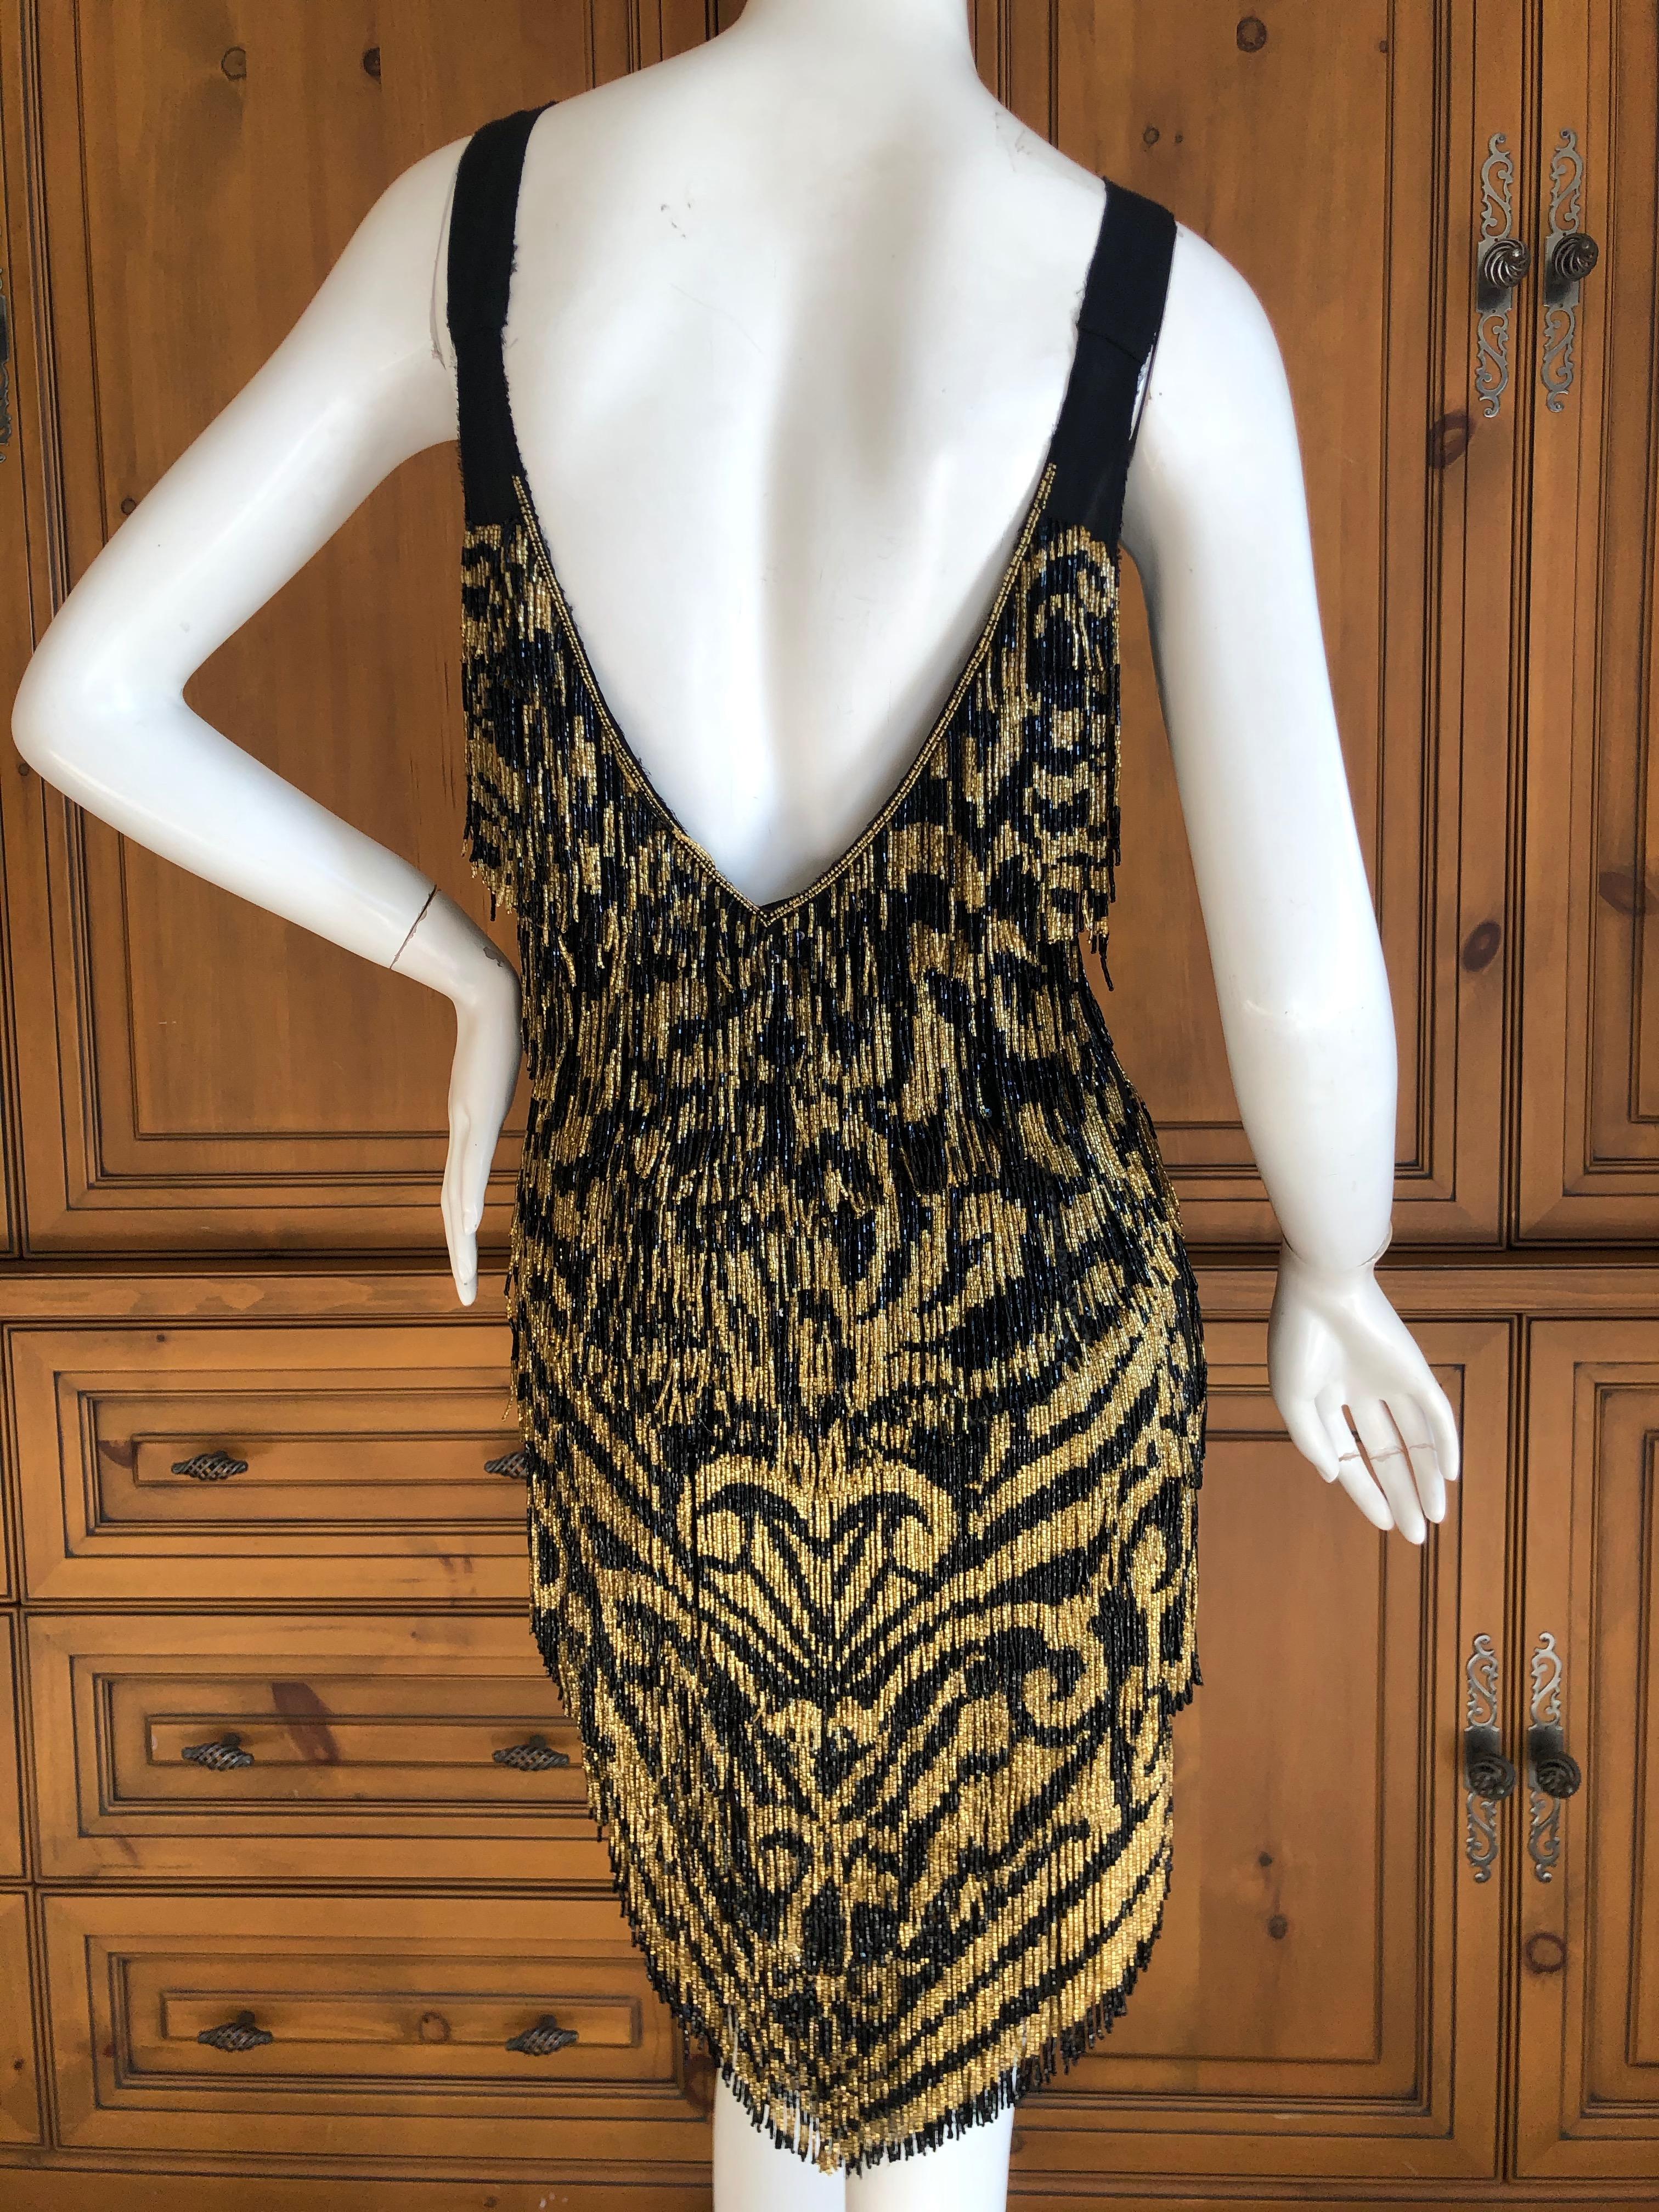 Emilio Pucci Flapper Style Black & Gold Beaded Fringe Mini Dress.
 WOW , this is so fun. 
These are glass beads, and this weighs a lot, so not for the faint of heart.
Size 40 / 6 US
 Bust 35